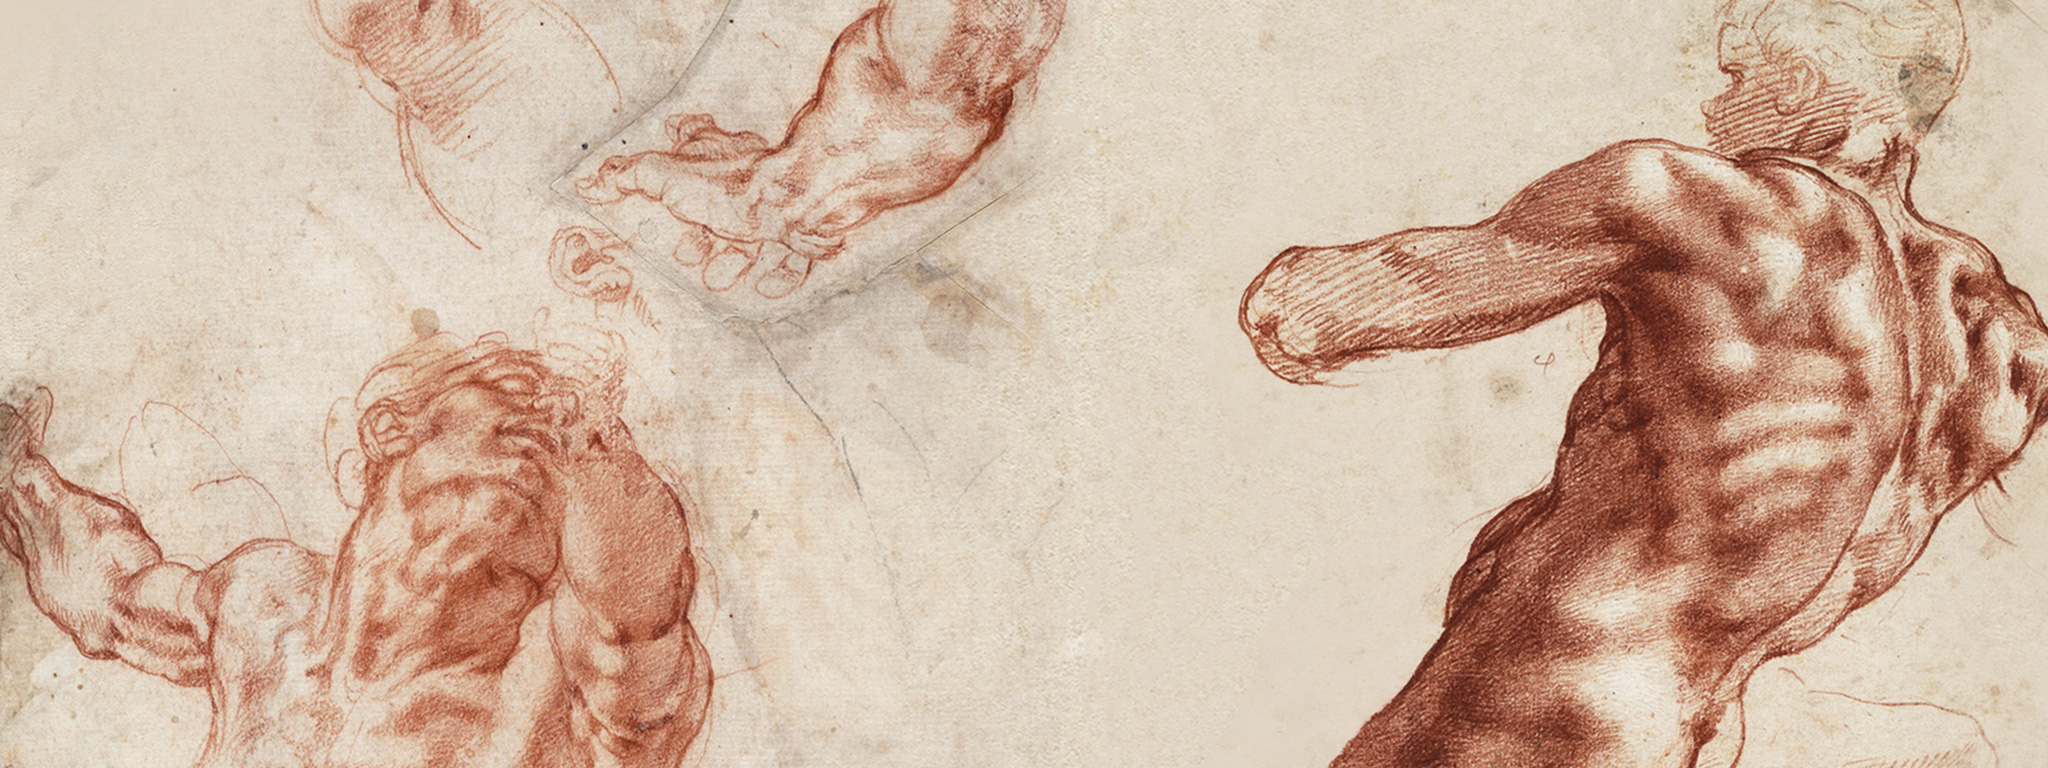 Studies of the upper body of a man and separate studies of an arm, a hand, and an ear; sketch of a tree, recto (detail), 1511–12, Michelangelo Buonarroti, red chalks and black chalk. Teylers Museum, Haarlem. Purchased in 1790. © Teylers Museum, Haarlem. Seated male nude, separate study of his right arm, recto (detail), 1511, Michelangelo Buonarroti, red chalk heightened with white. Teylers Museum, Haarlem, purchased in 1790. © Teylers Museum, Haarlem